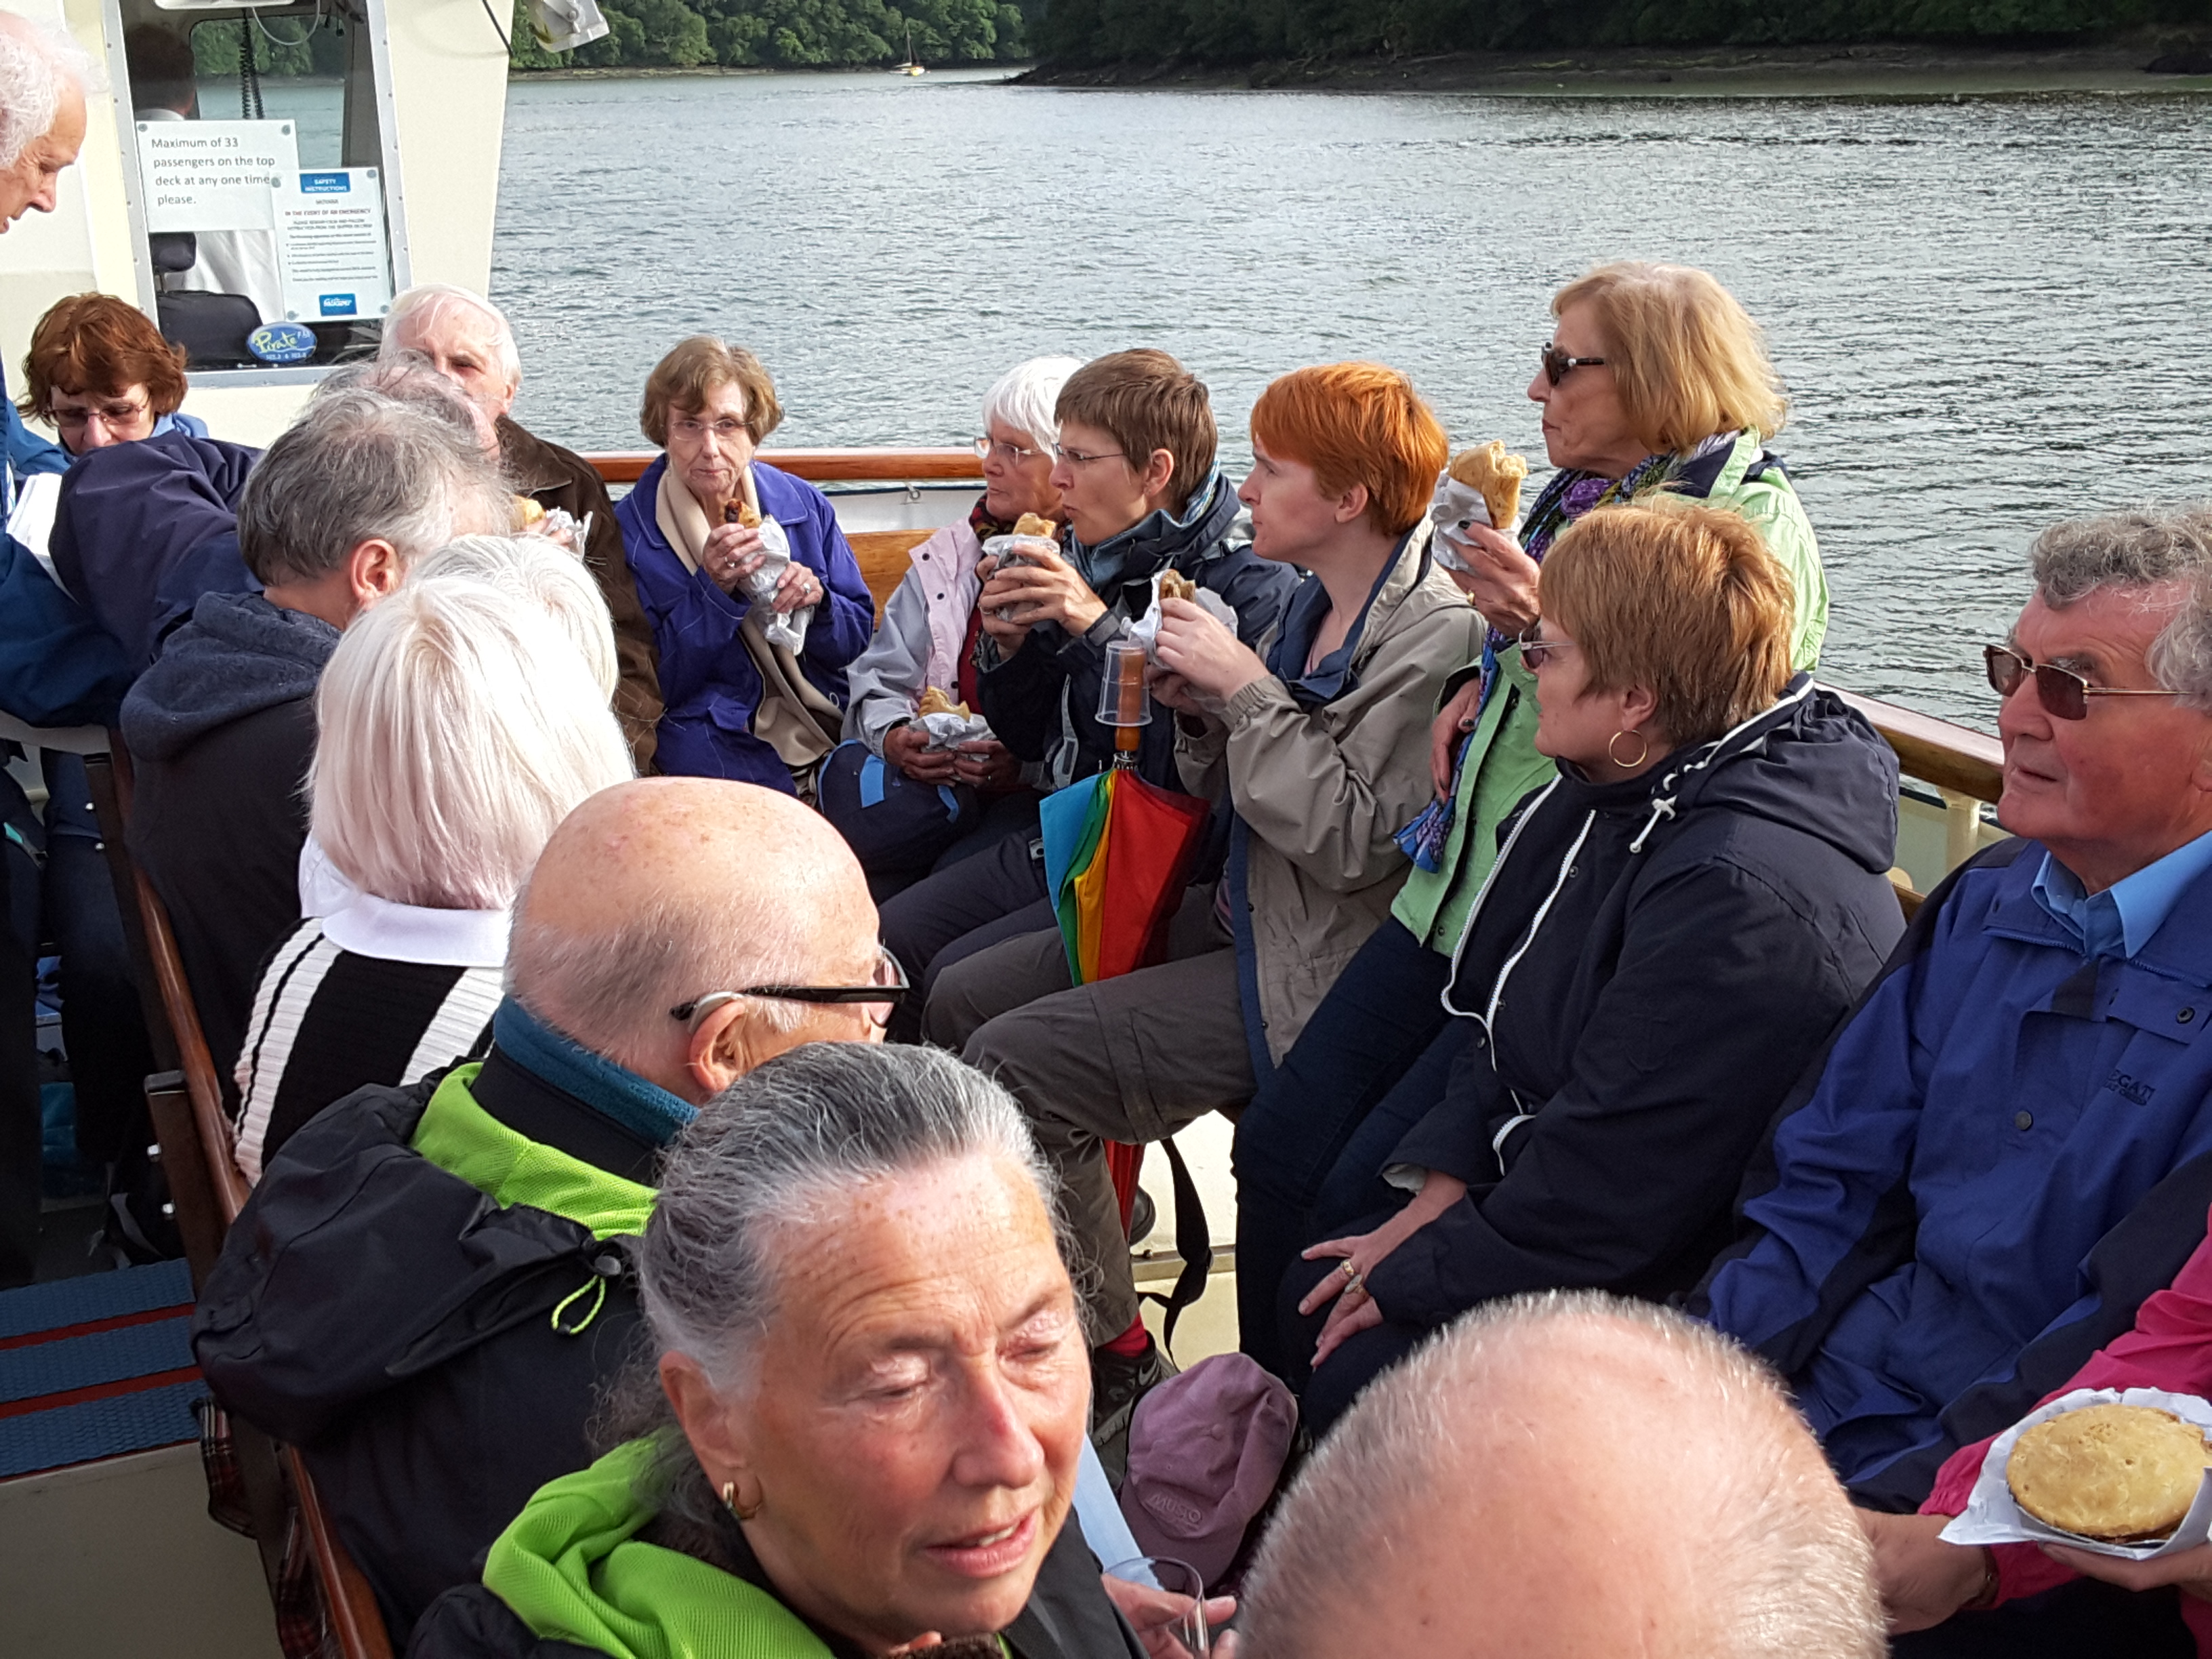 And we're off! The Friends' annual boat trip down the River Fal.